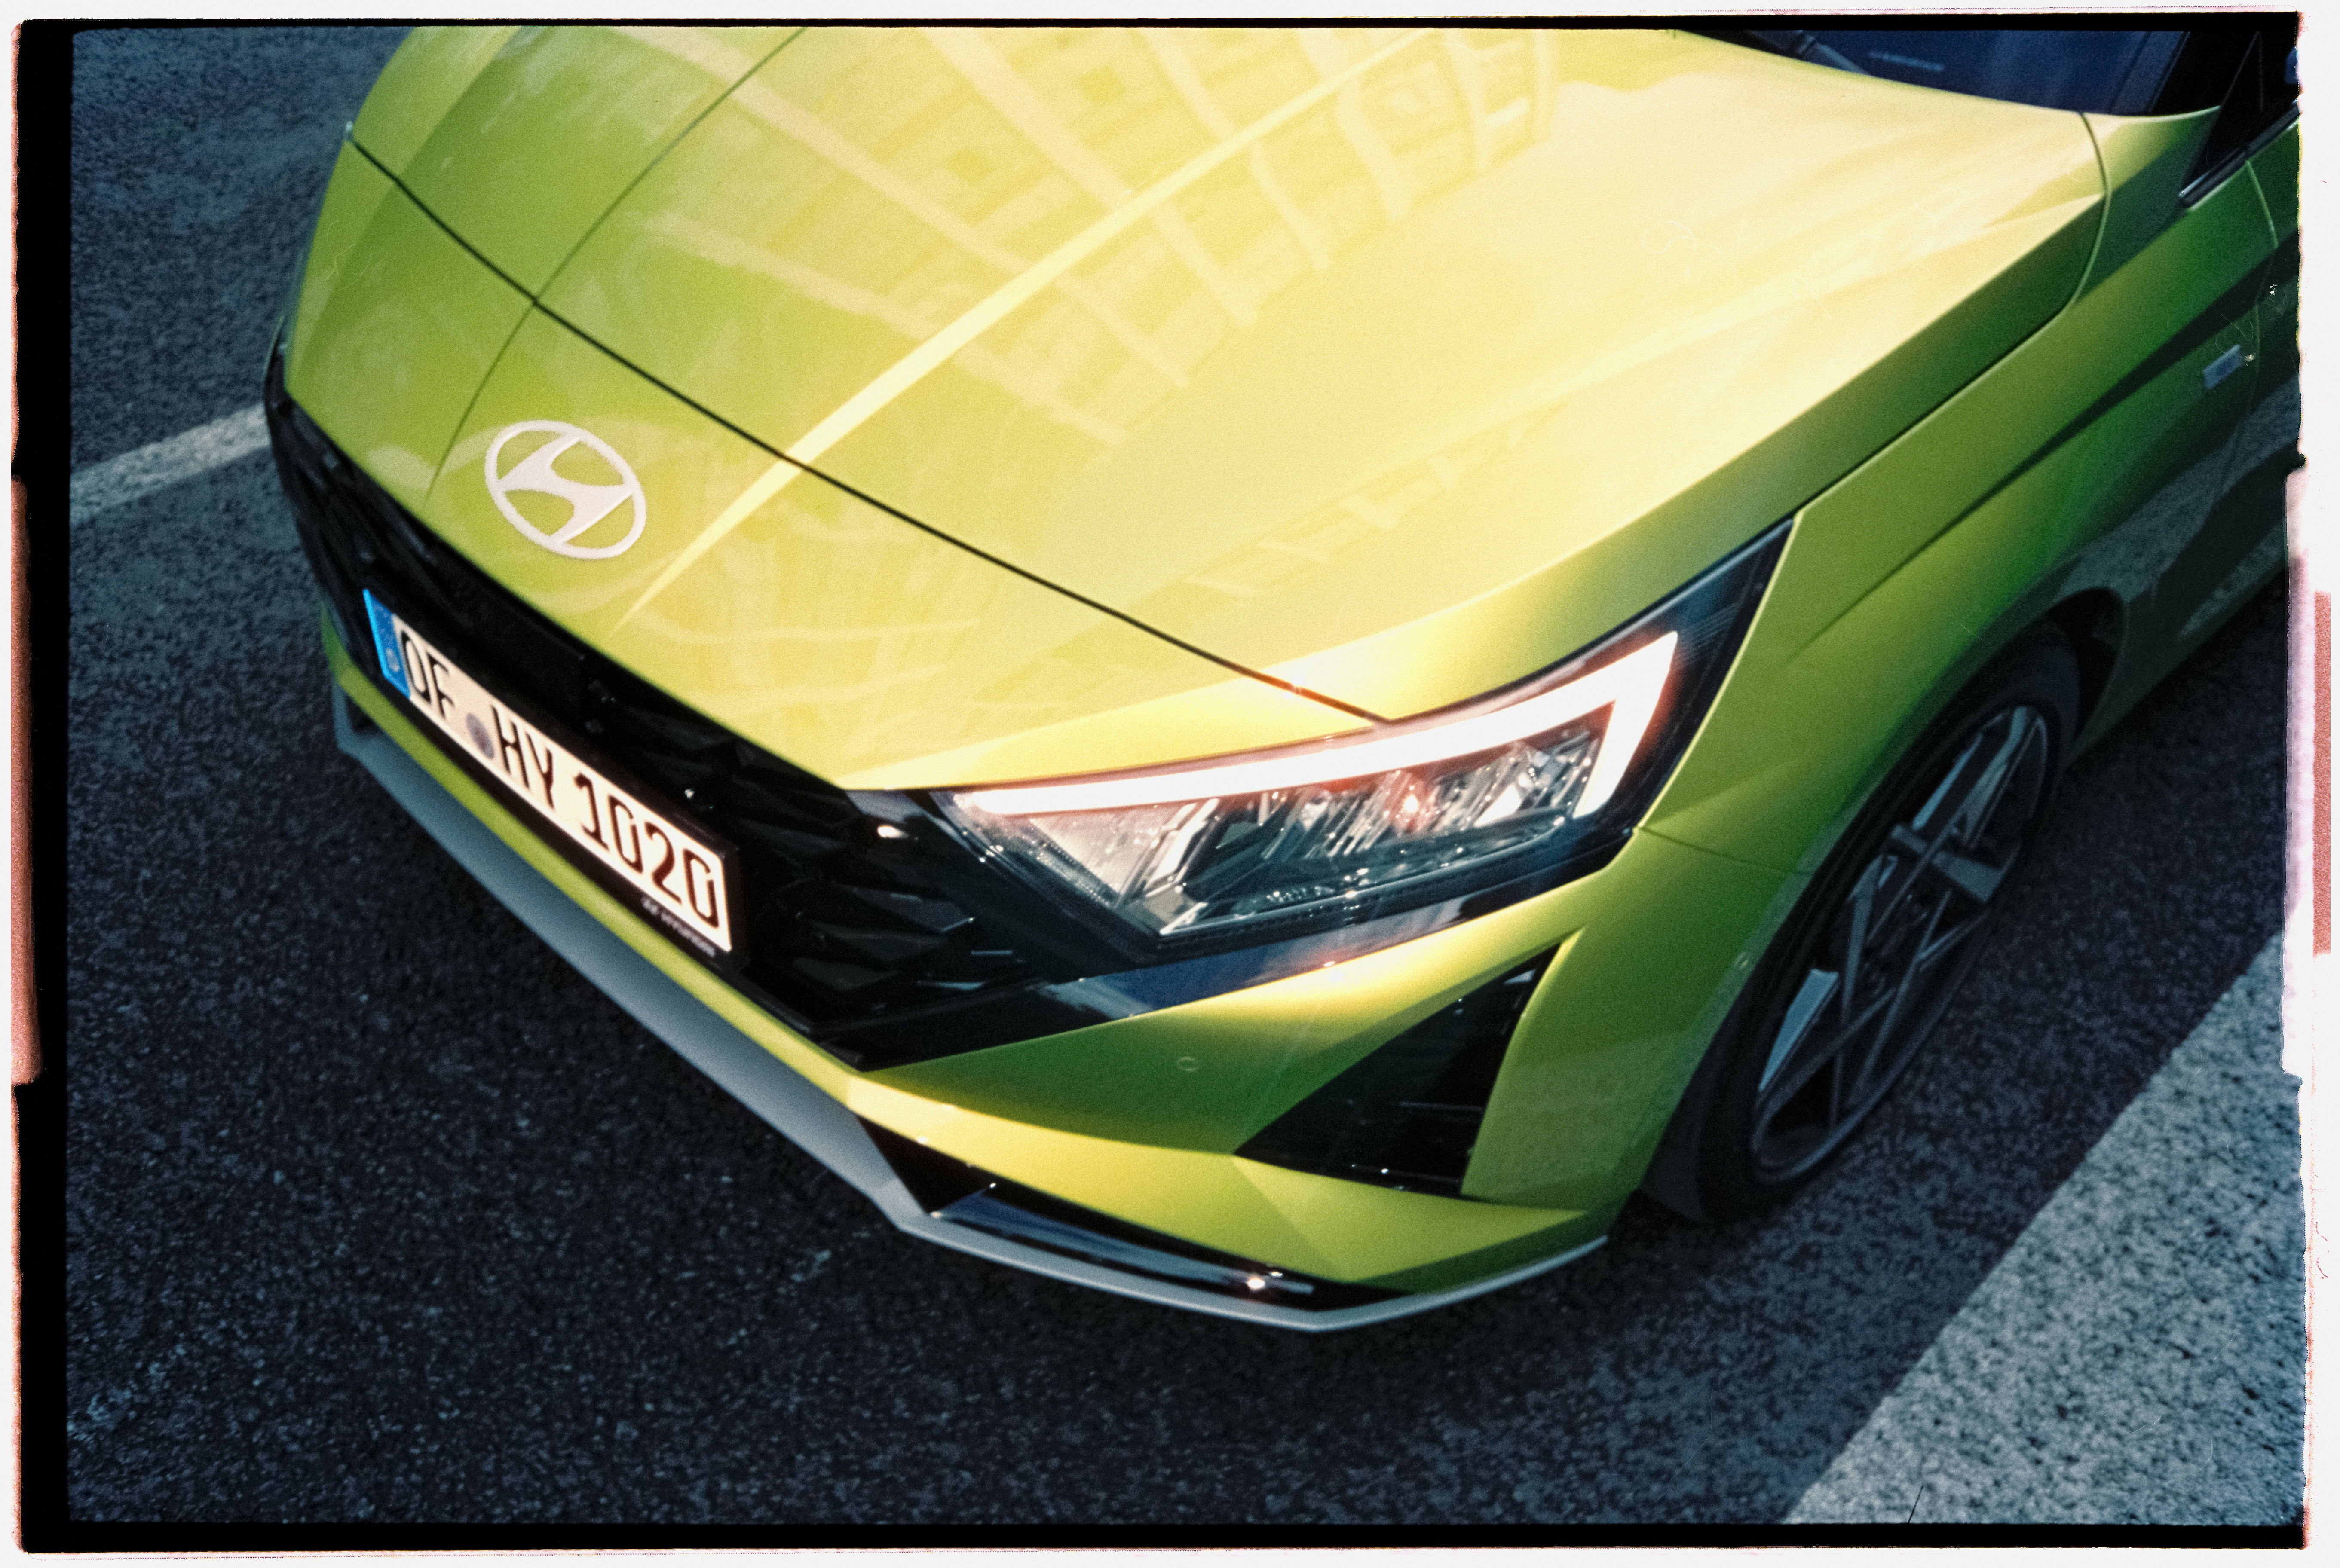 The front of a green Hyundai i20, seen from above, with a clear view of the left headlamp.